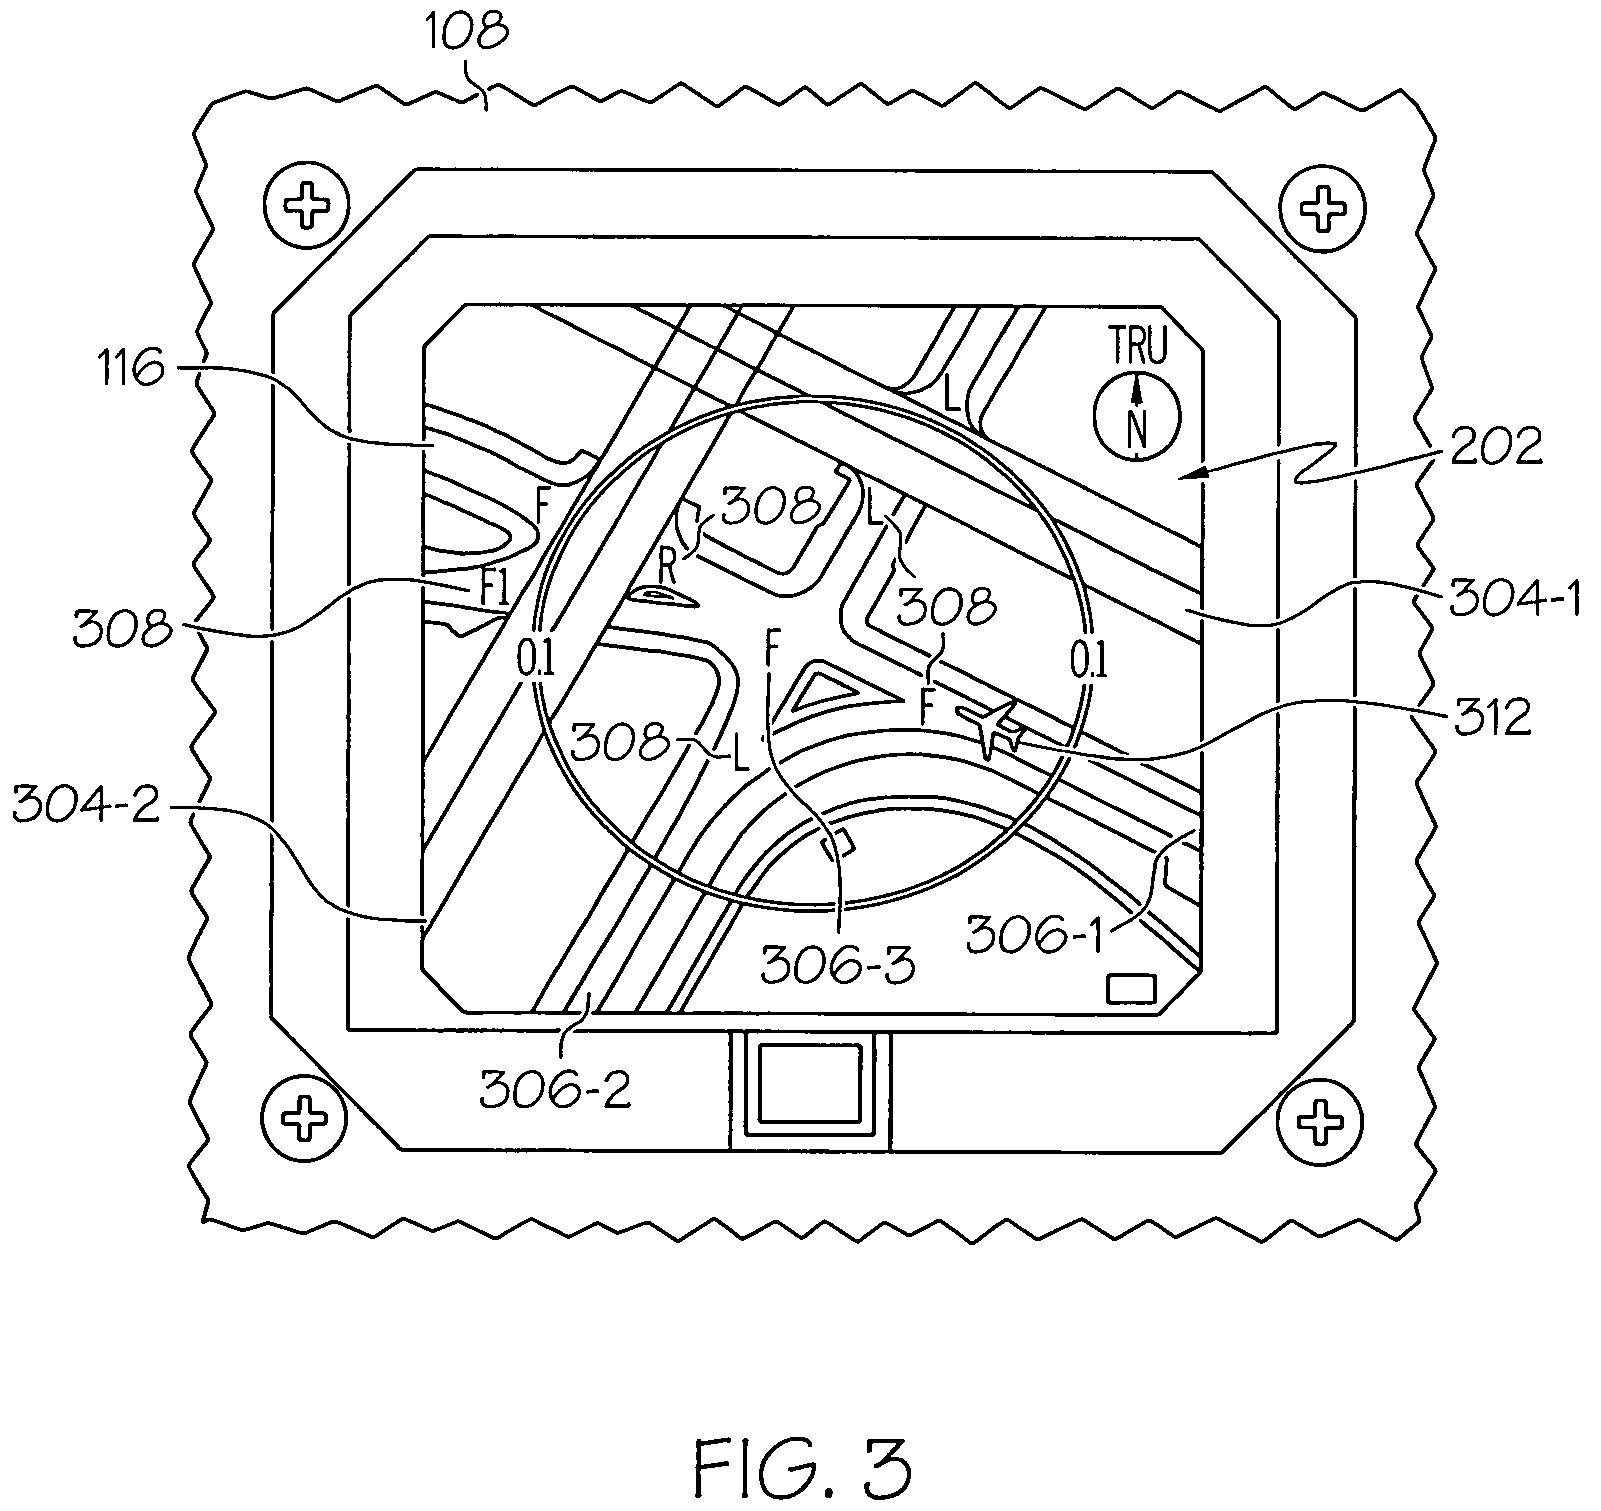 System and method for selective display of a standby attitude indicator and an airport map data using the same display